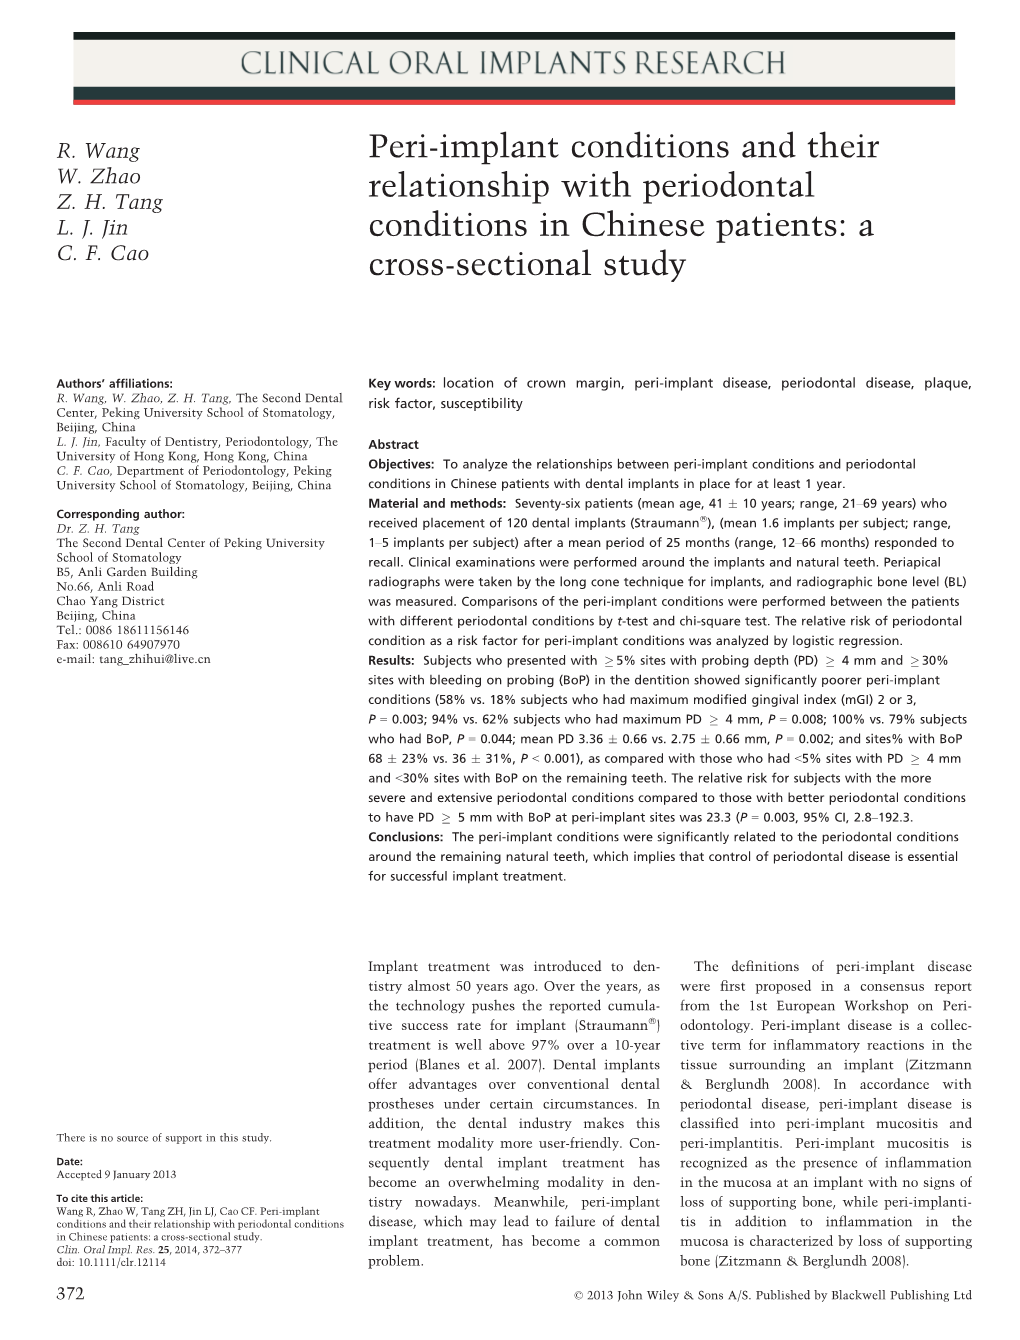 Periimplant Conditions and Their Relationship with Periodontal